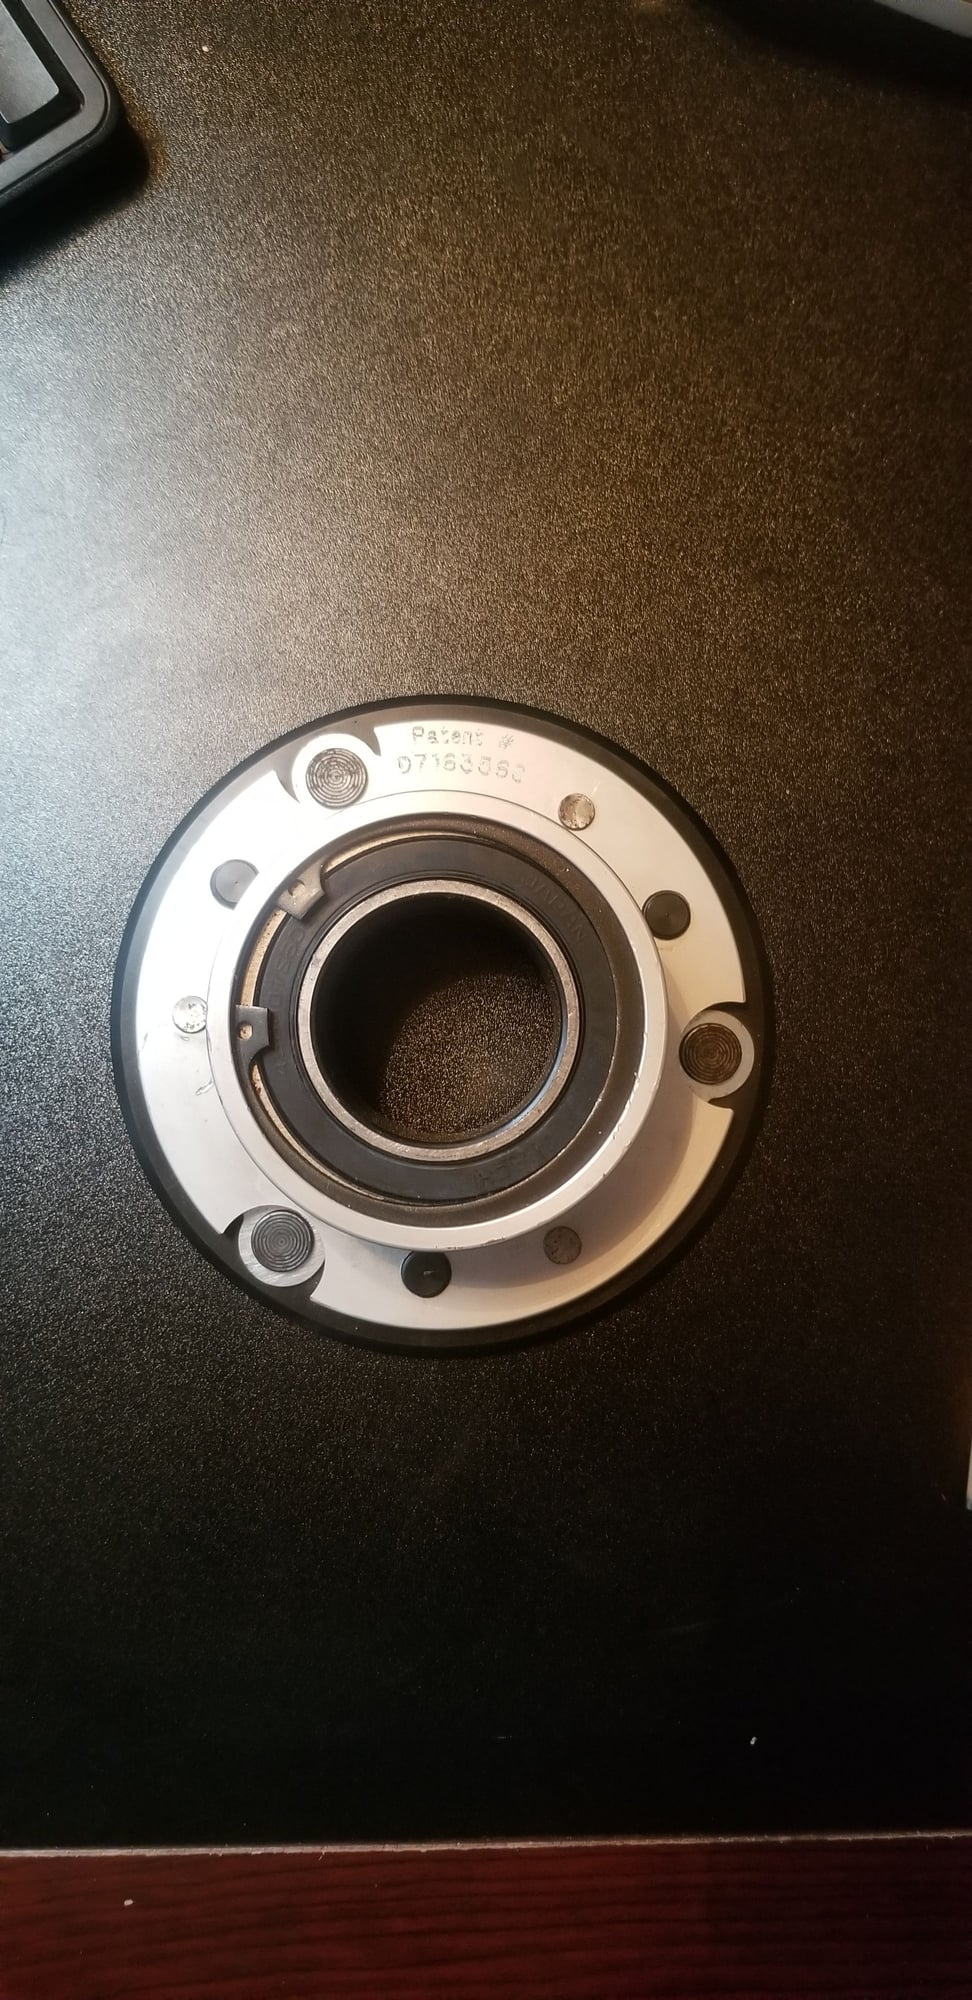 Engine - Power Adders - UPD 83mm Clutched Supercharger Pulley E55 SL55 M113K - Used - 2003 to 2005 Mercedes-Benz E55 AMG - Milford, PA 18337, United States